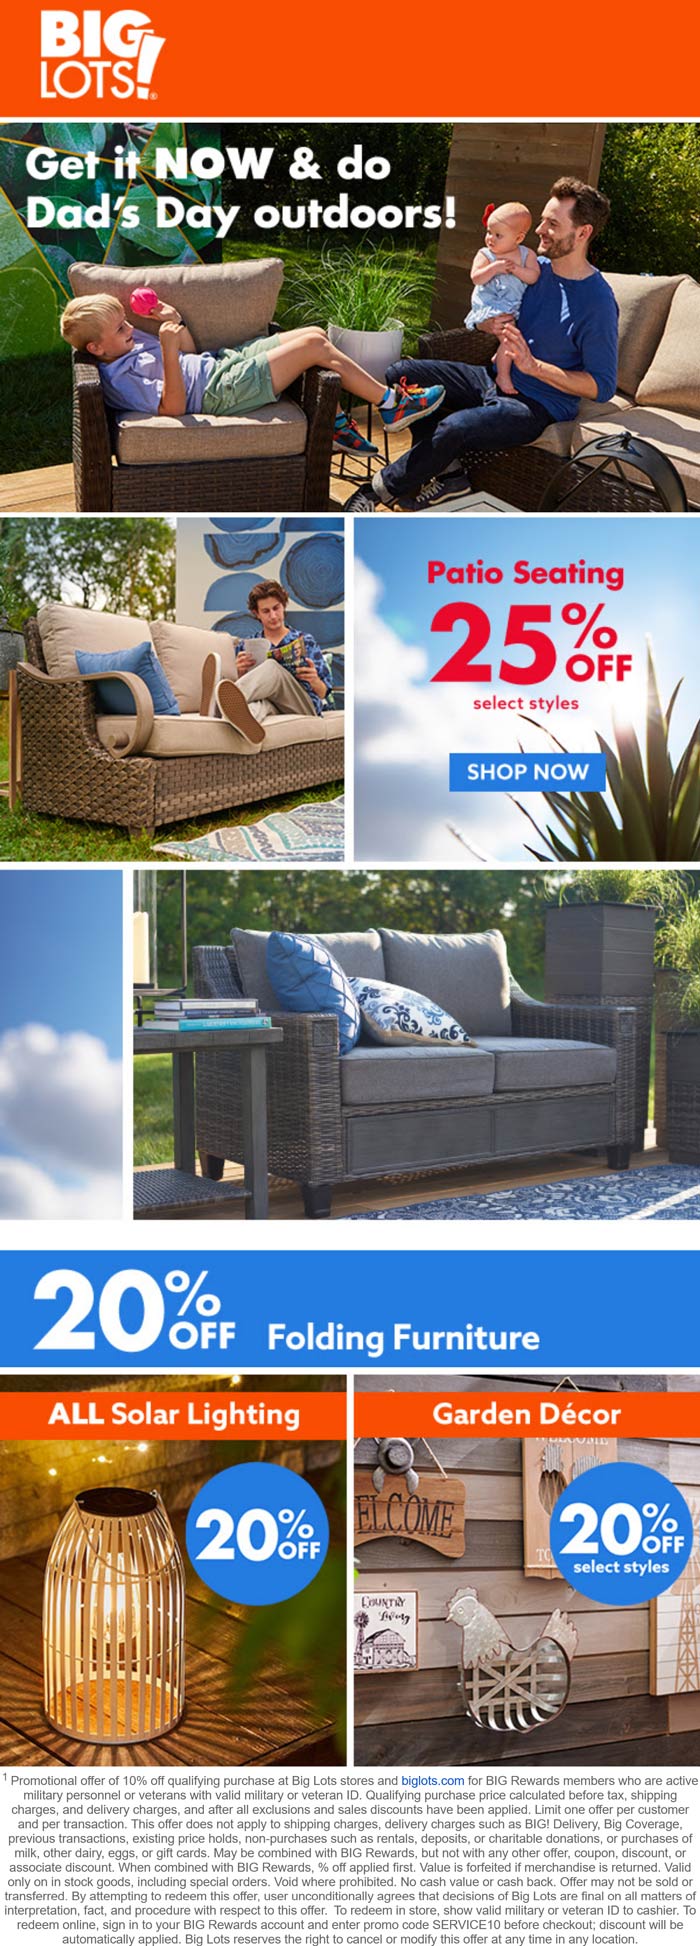 Big Lots stores Coupon  25% off patio seating today at Big Lots, ditto online #biglots 